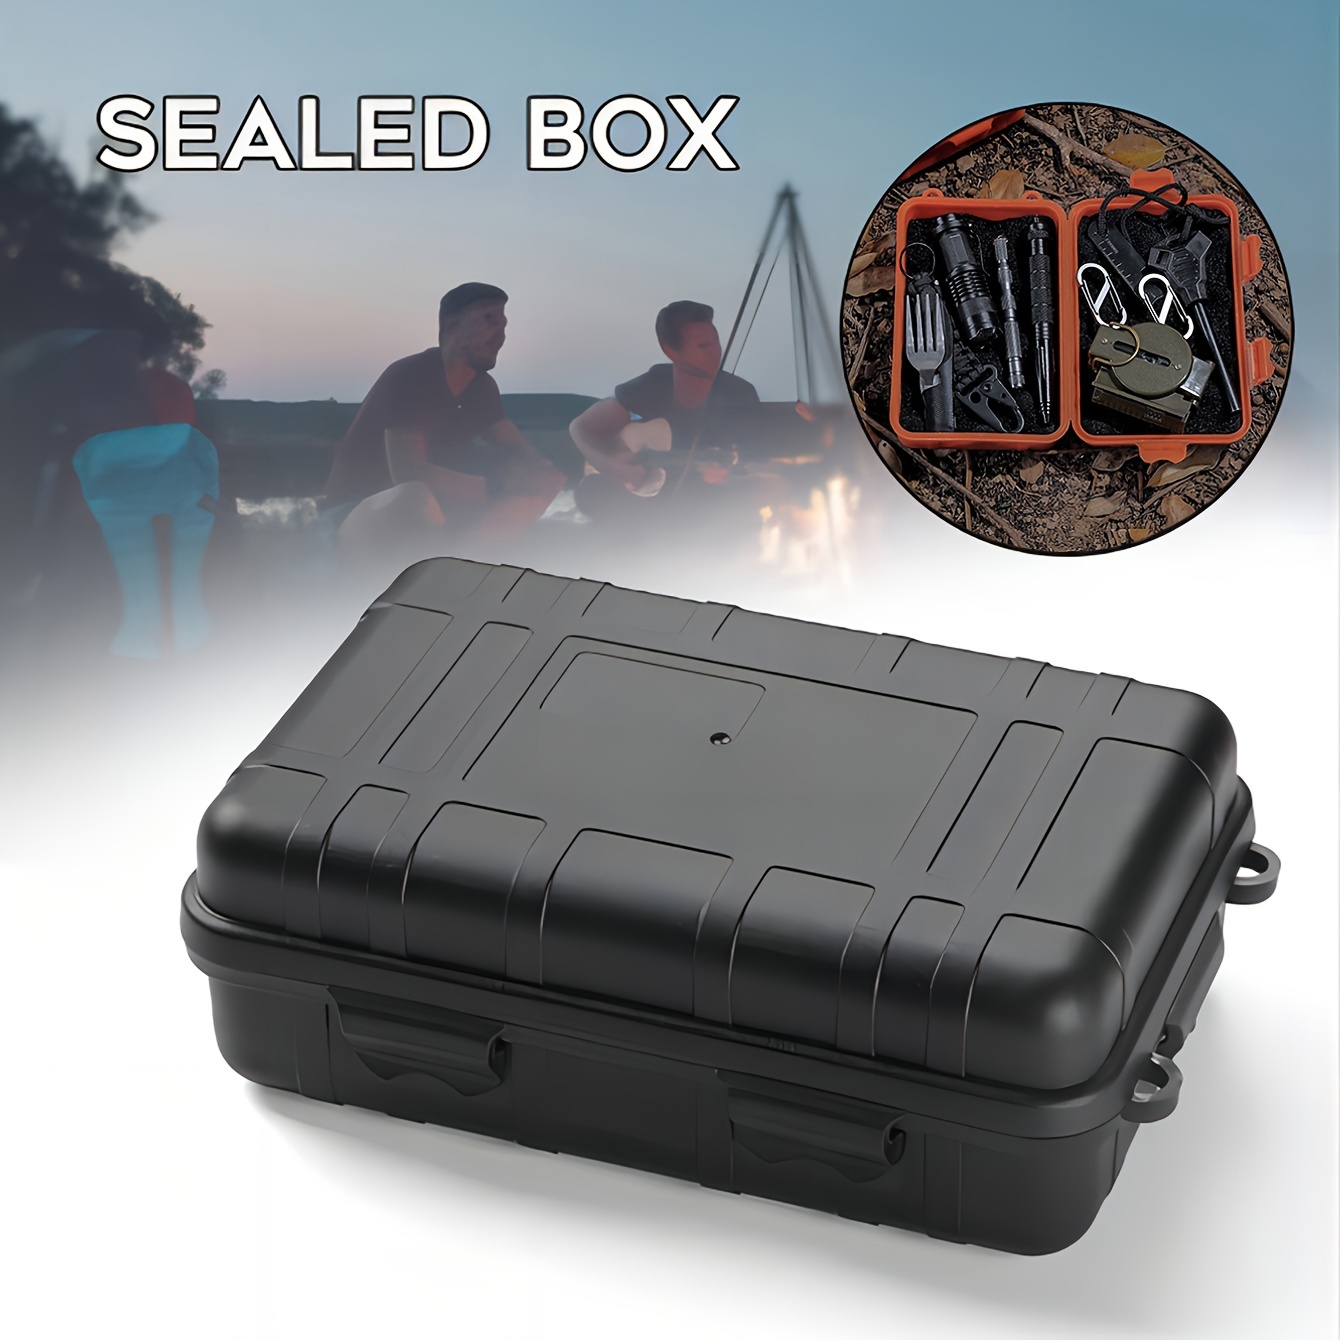 

1pc 1050ml Black Waterproof Shockproof Outdoor Storage Box Field Survival Tool Storage Case For Hunting, Hiking, Camping, Fishing, Swimming, Outdoor Survival, Etc.